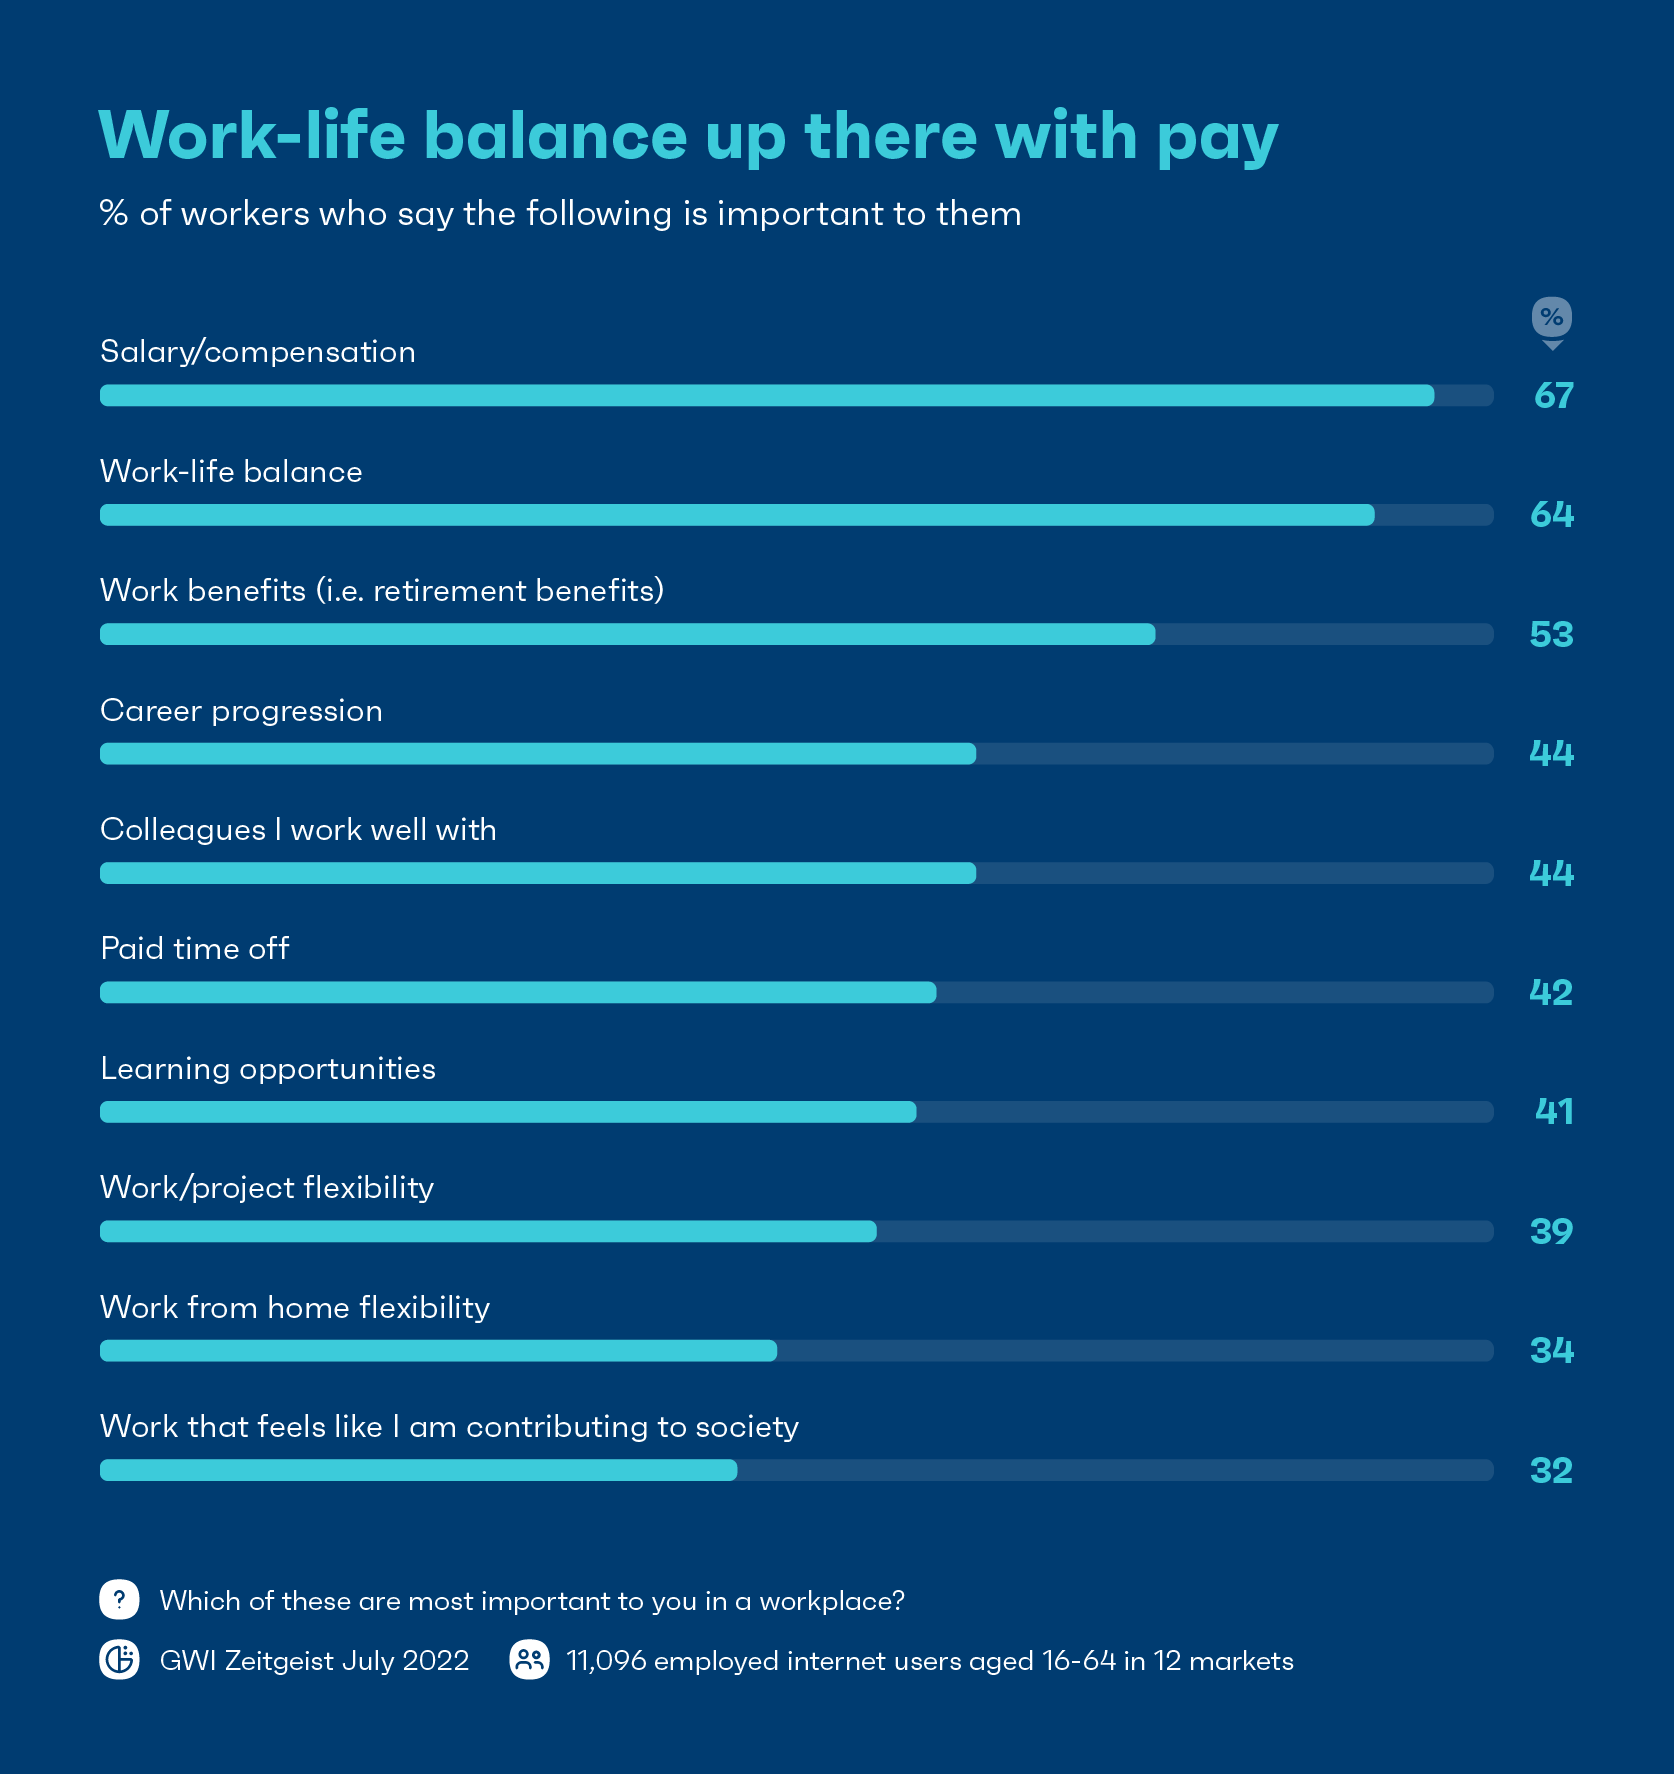 Work life balance is up there with pay. This chart shows the percentage of workers who say salary and work life balance are important.